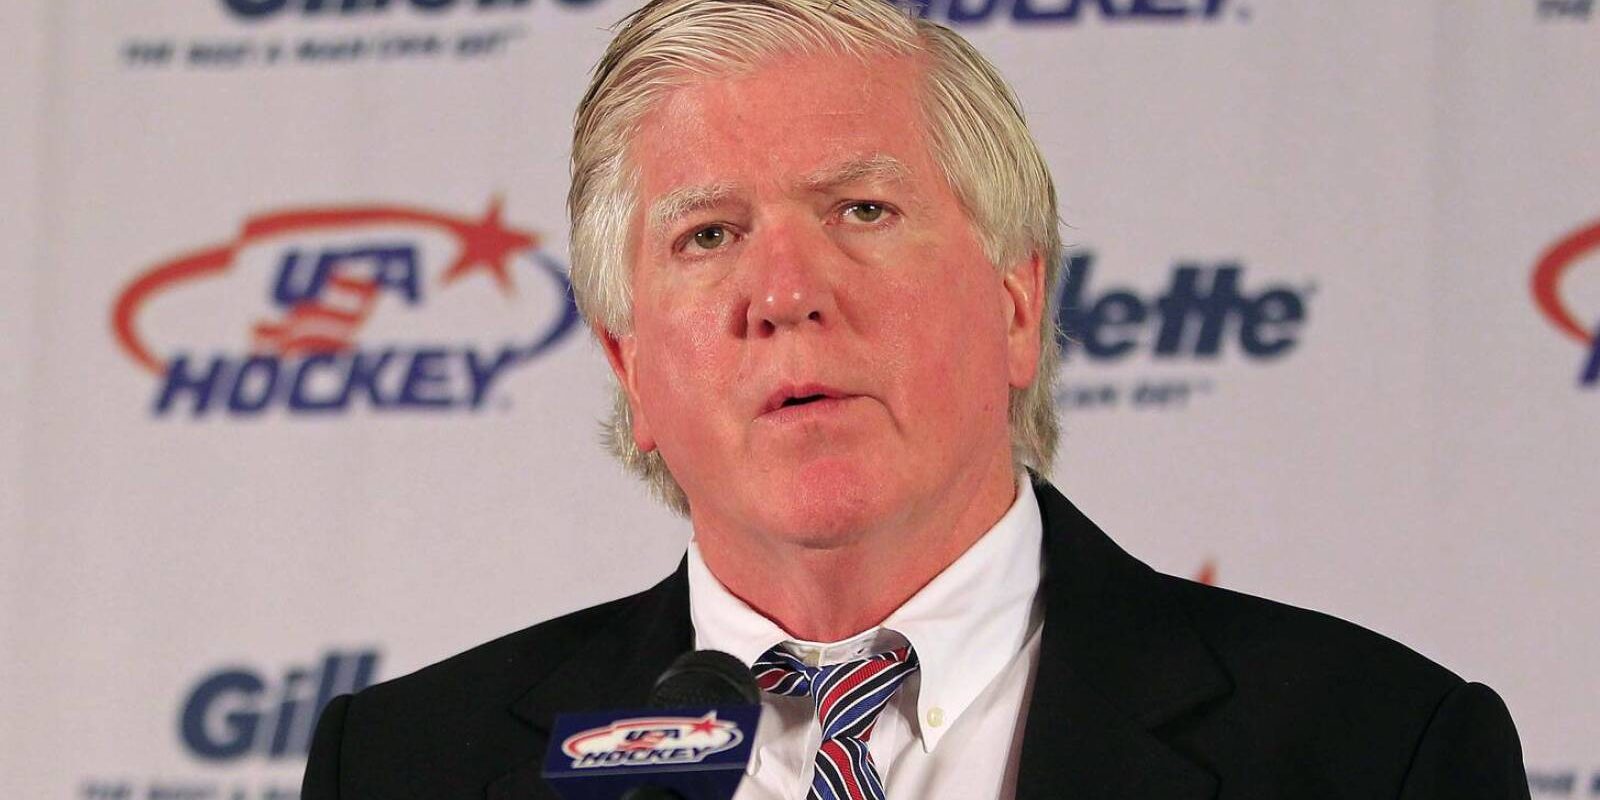 Aug 26, 2013; Arlington, VA, USA; Team USA director of player personnel Brian Burke speaks during a press conference at the start of the 2013 U.S. Men's national team camp at Kettler Capitals Iceplex. Mandatory Credit: Geoff Burke-USA TODAY Sports